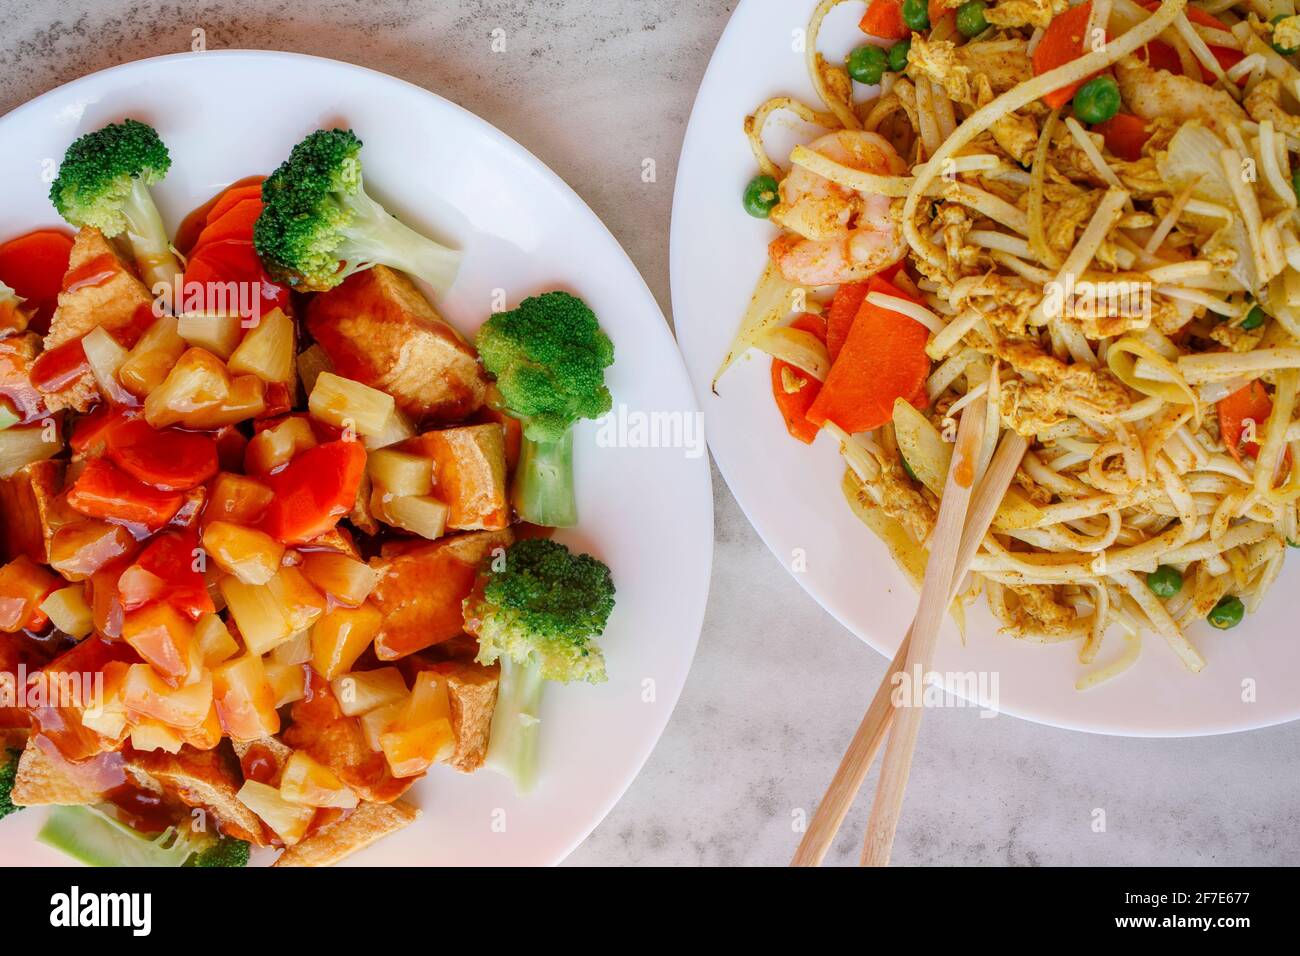 Above-view of Asian food plated on table Stock Photo